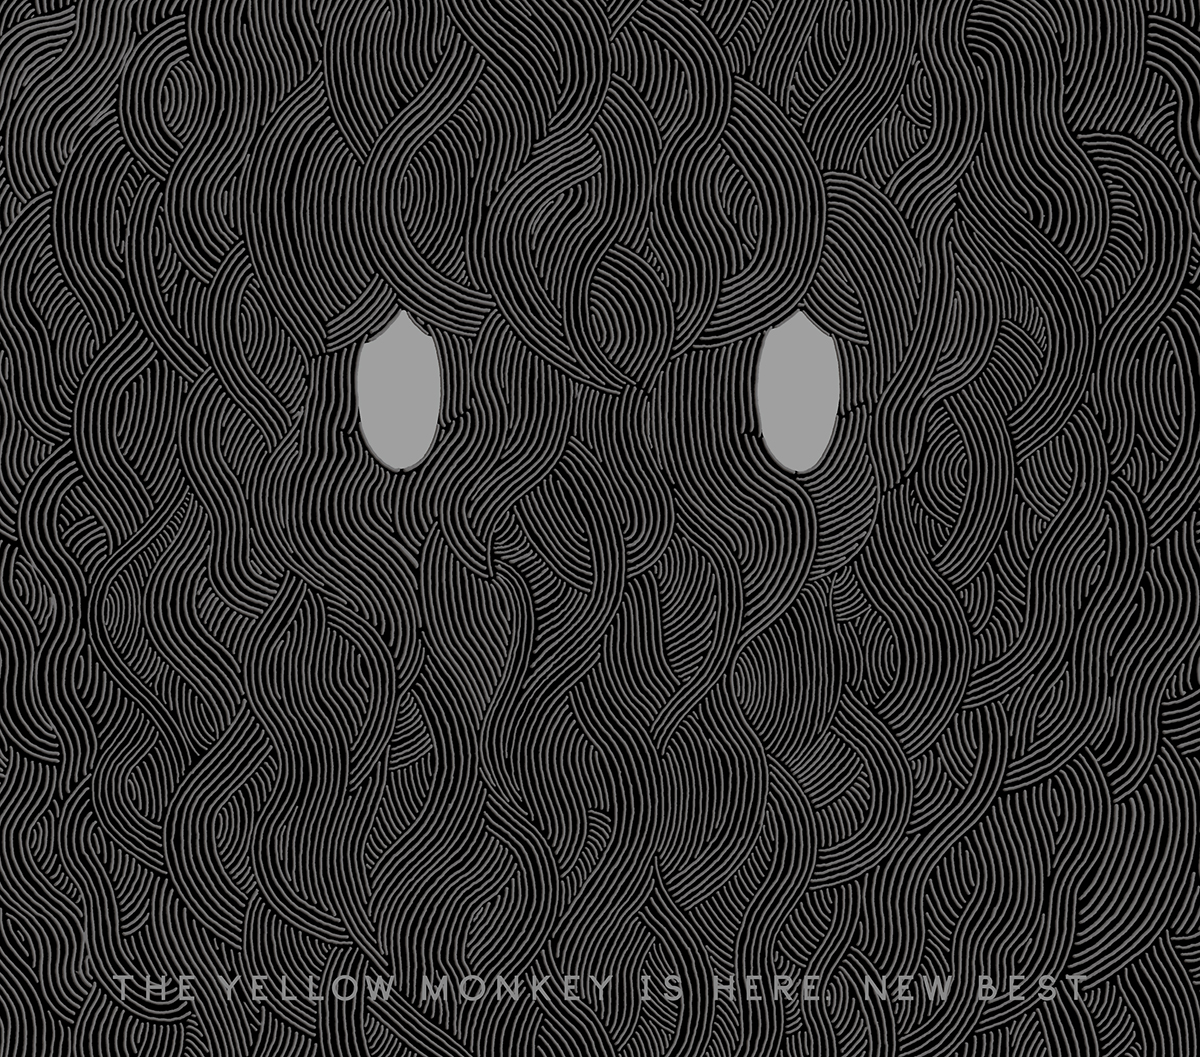 THE YELLOW MONKEY IS HERE. NEW BEST